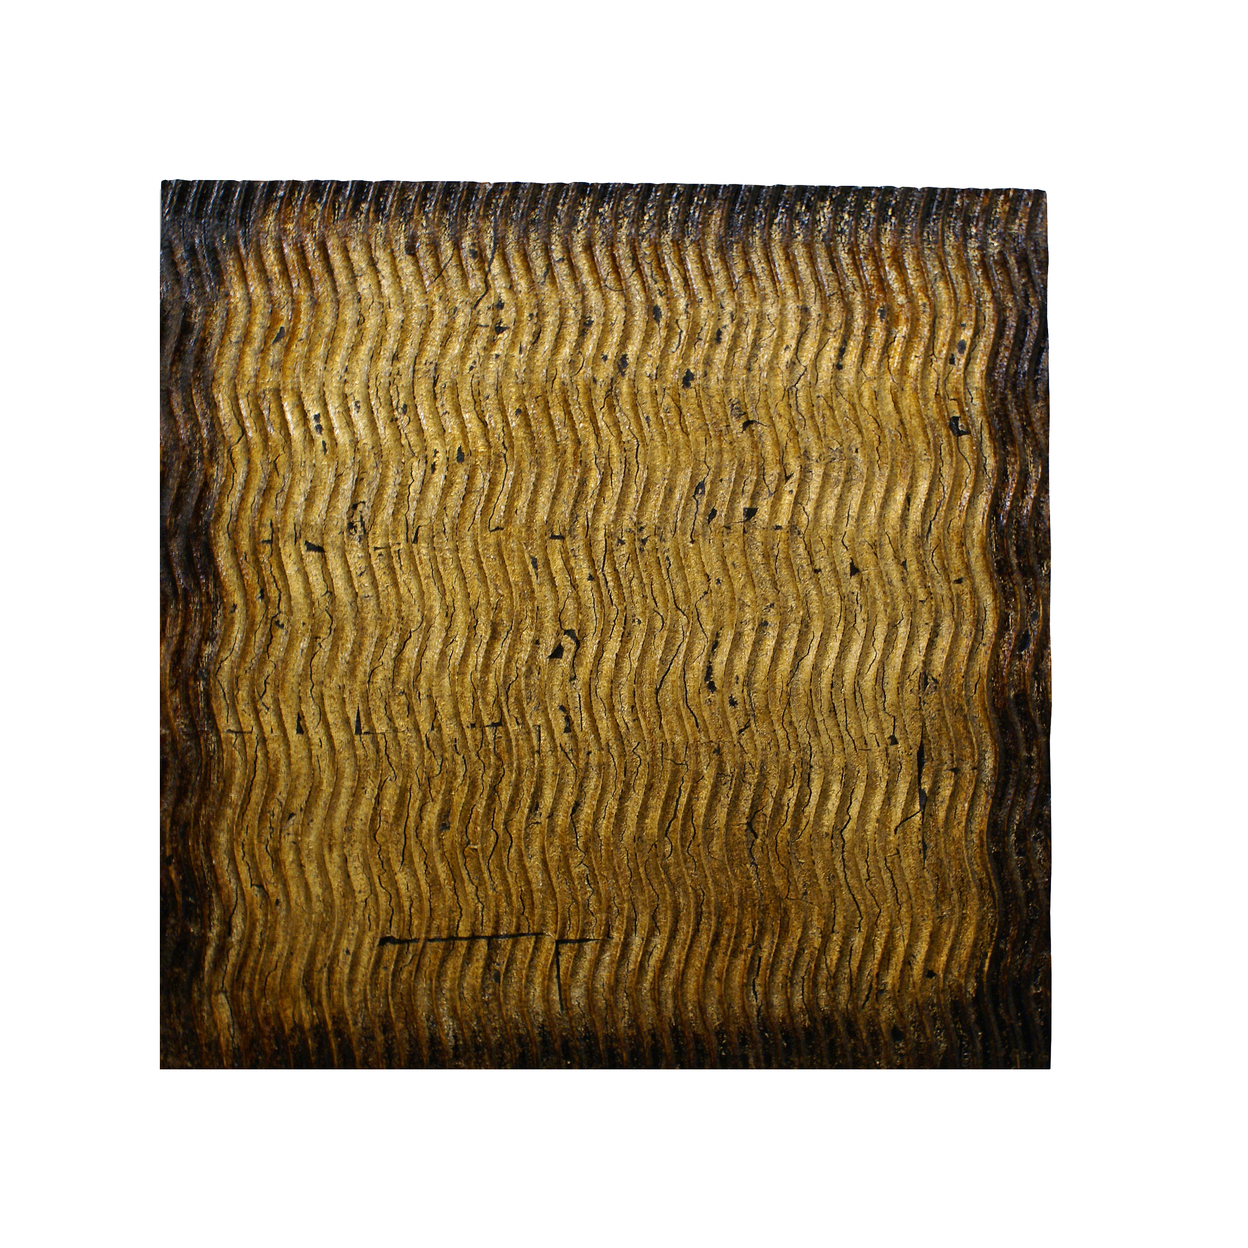 Modern Style Wood Wall Decor With Patterned Carving, Large, Gold & Brown- Saltoro Sherpi